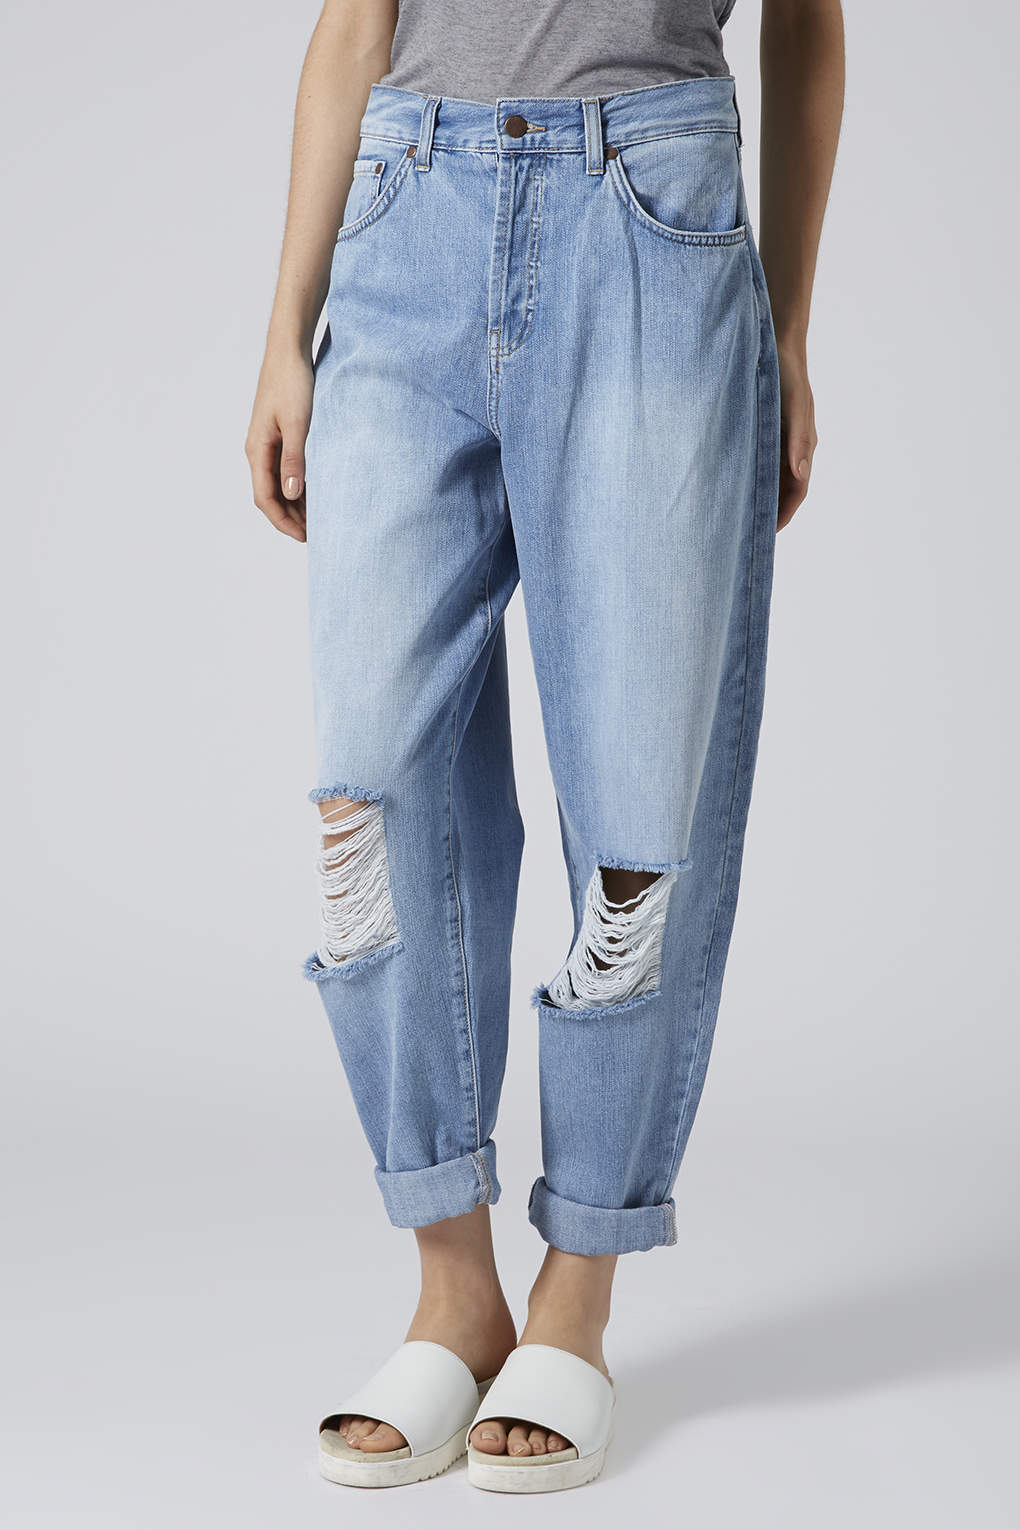 TOPSHOP Surf Ripped Baggy Jeans in Blue - Lyst